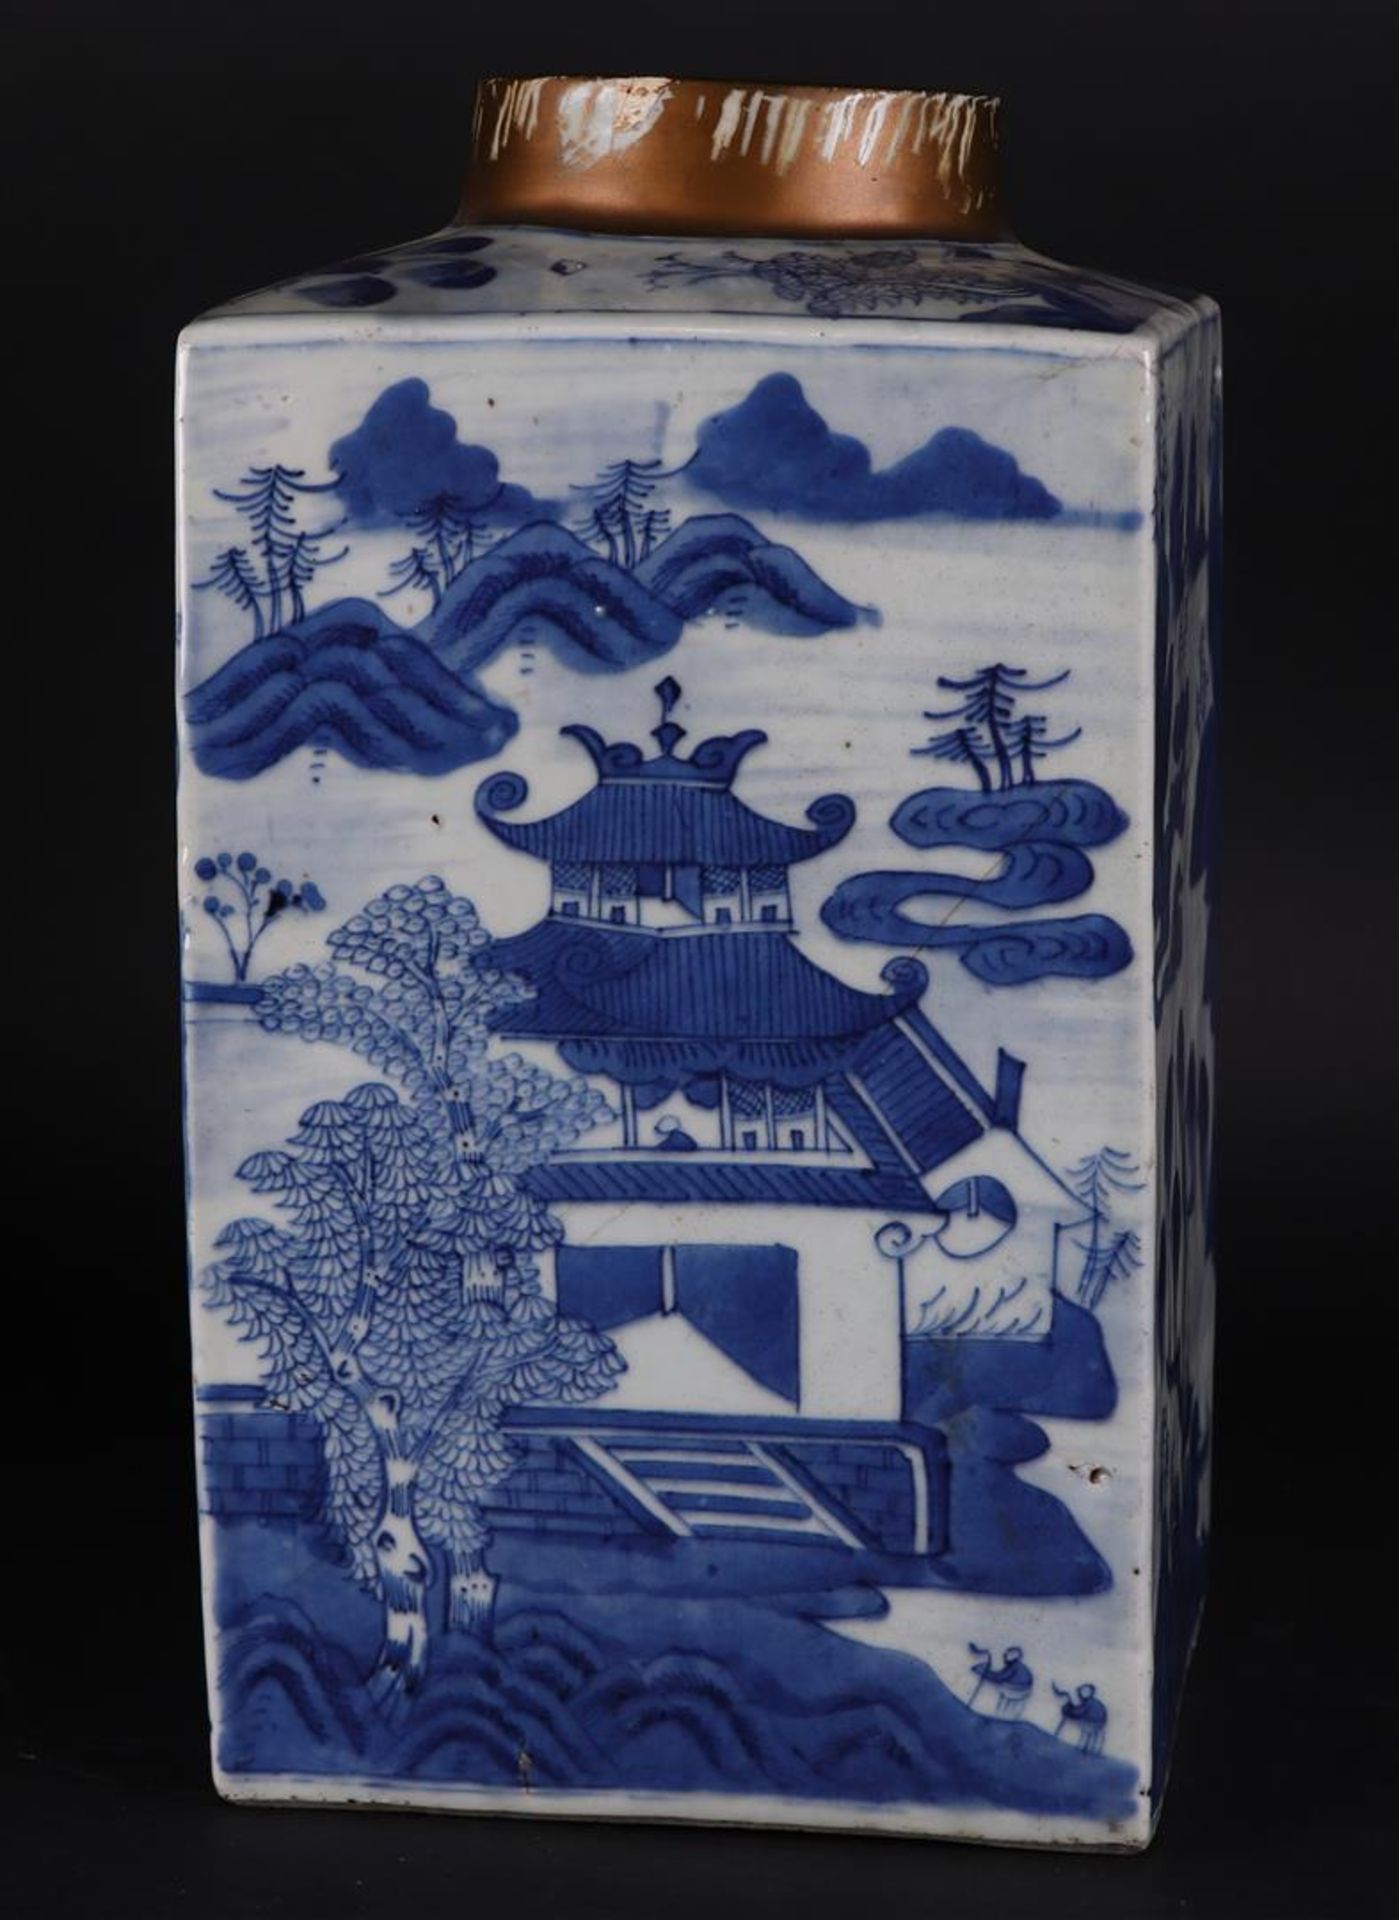 A square porcelain storage jar decorated with various landscapes. China, 19th century. - Image 3 of 6